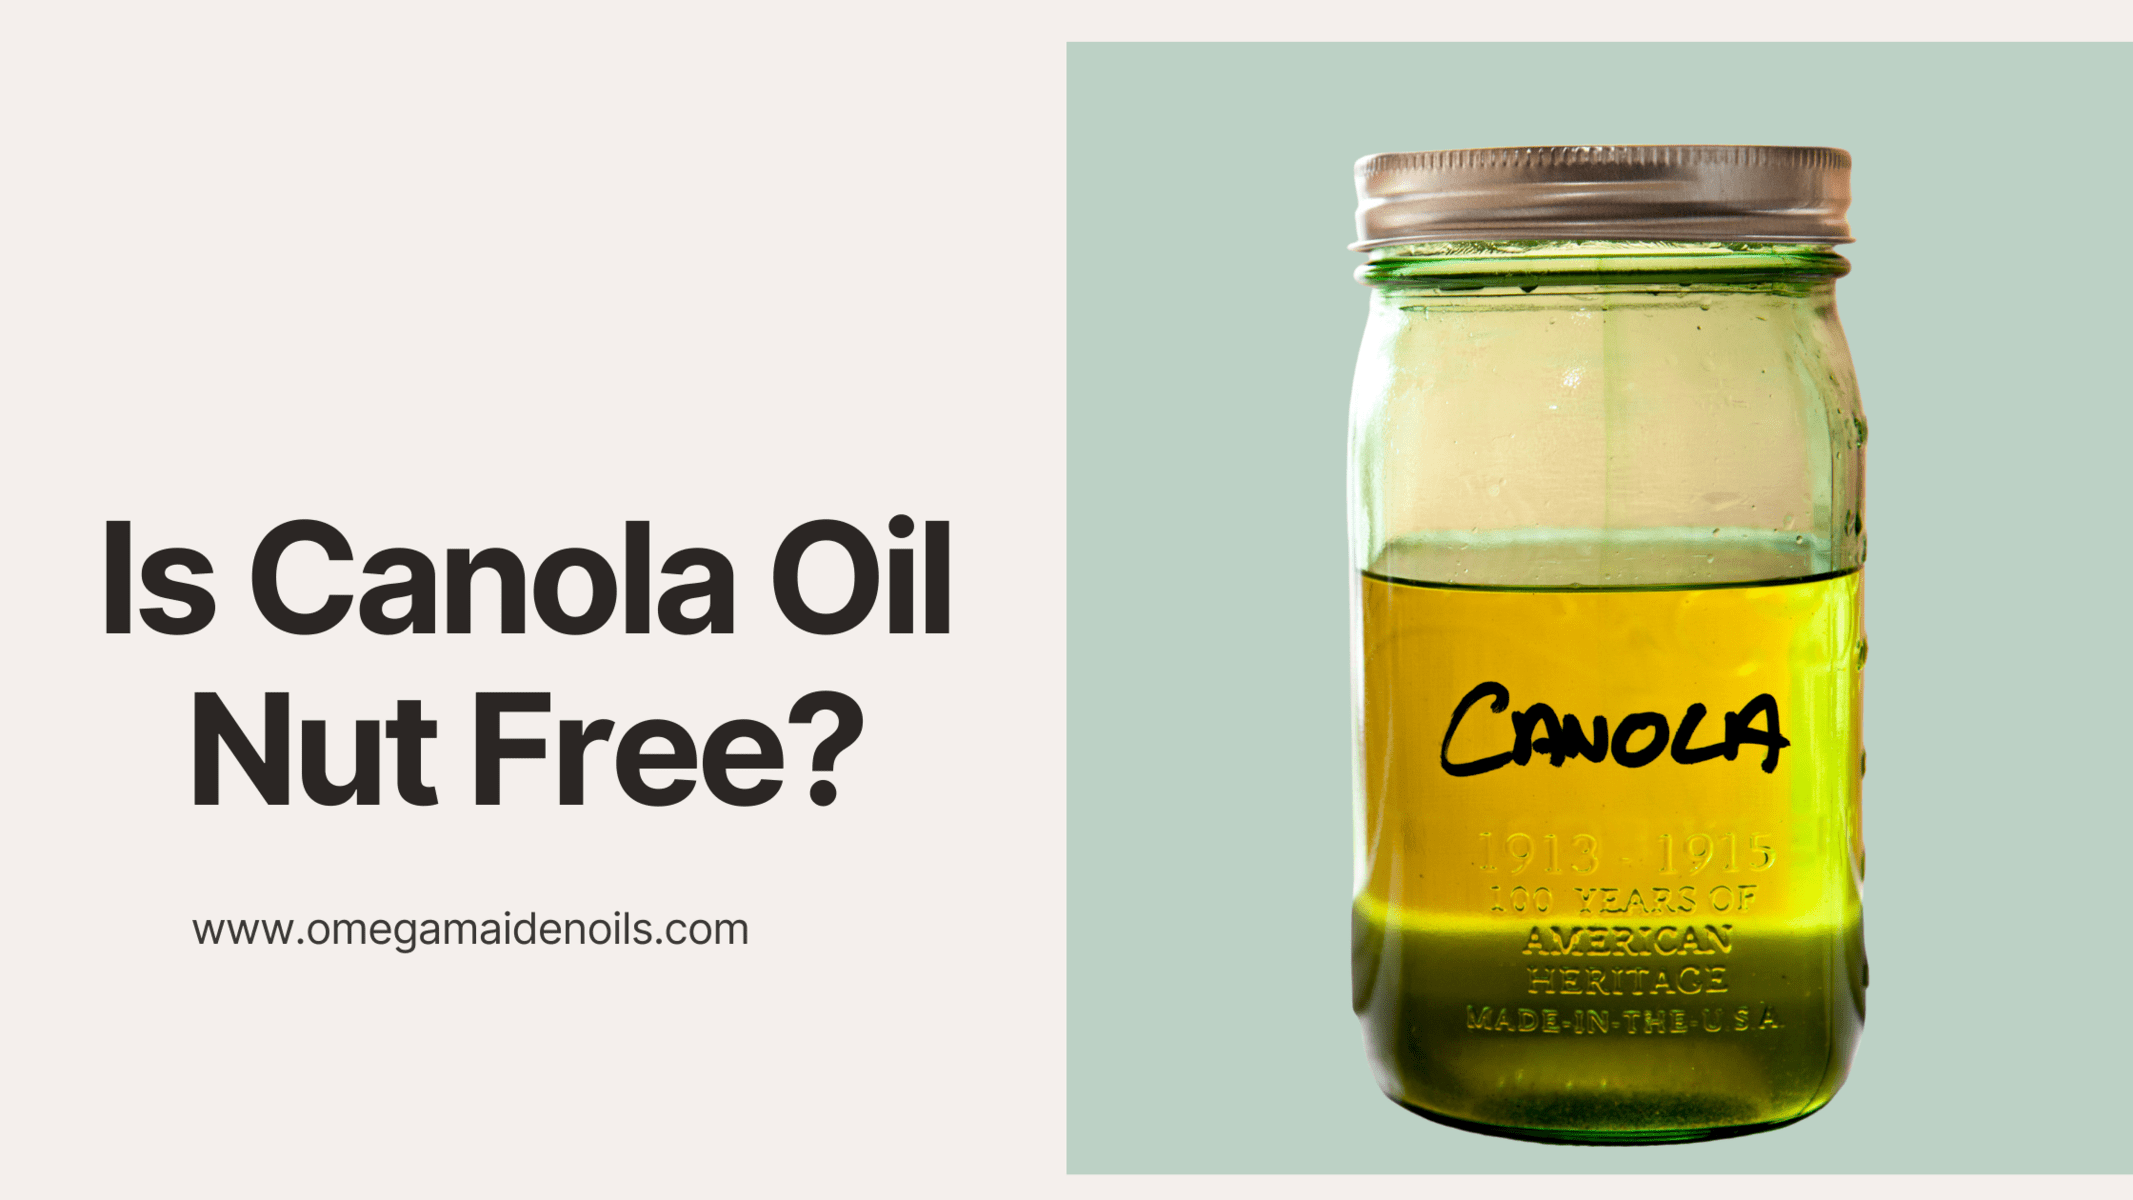 Is Canola Oil Nut Free?